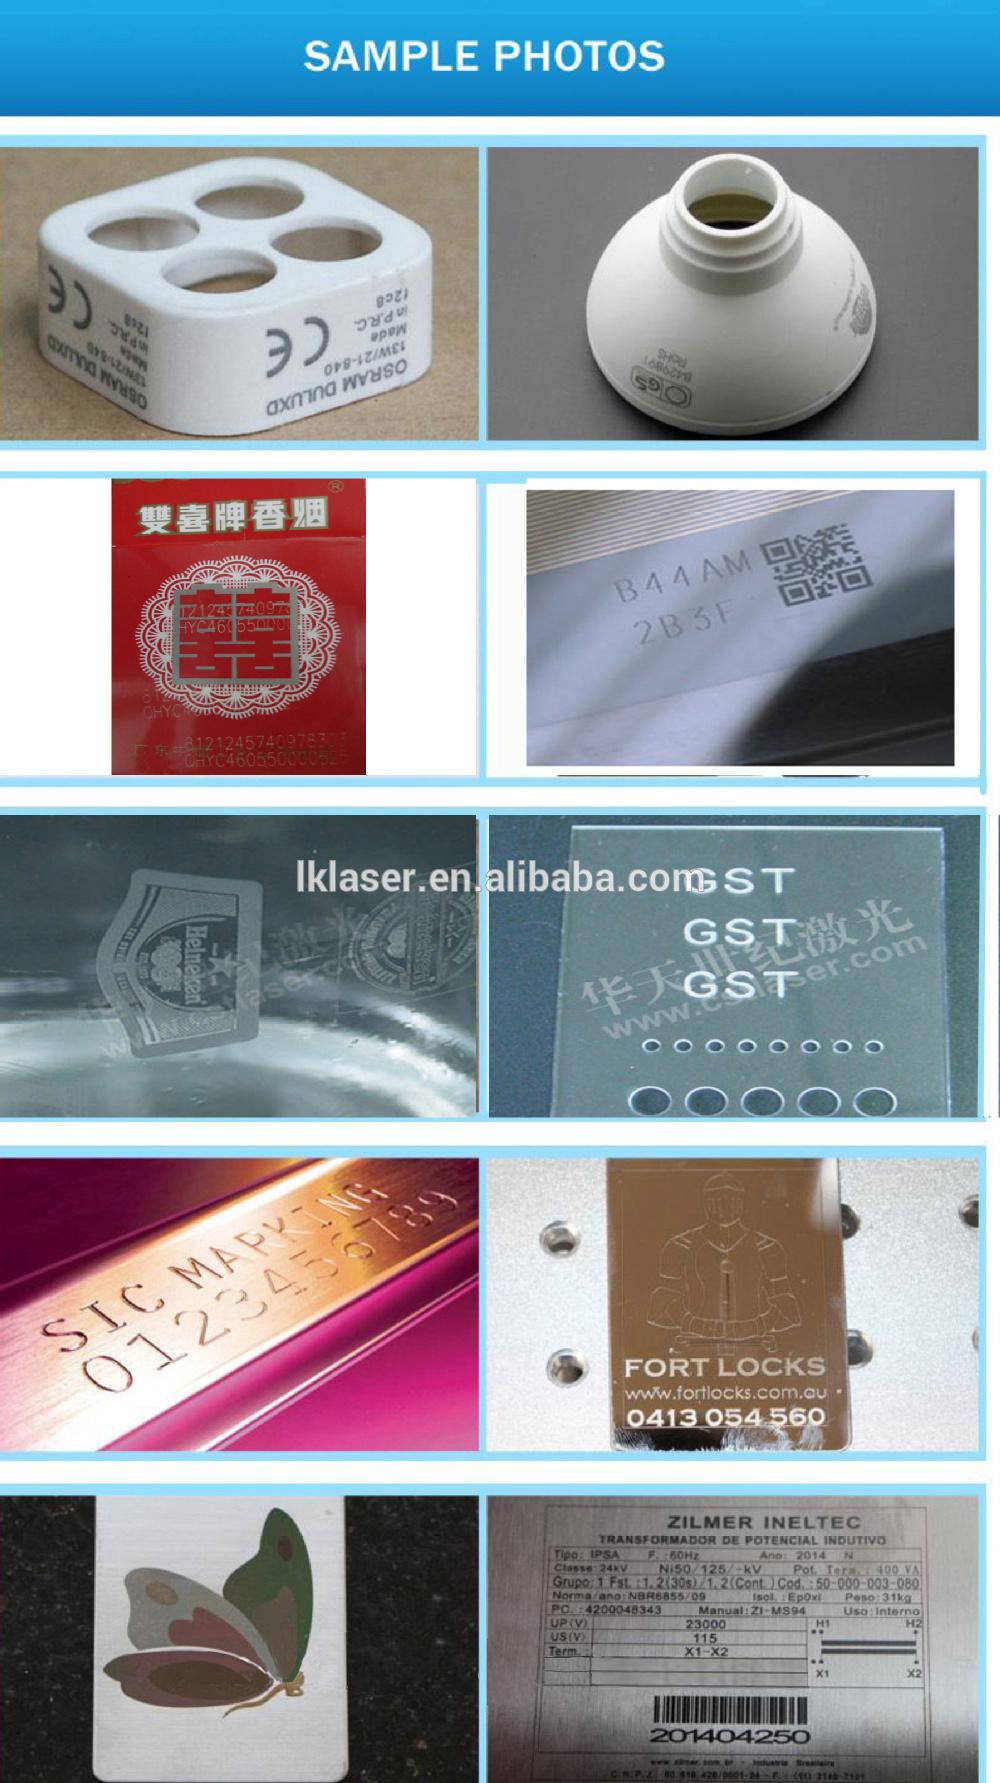 Automatic Name Plate label Laser Marking Machine Automatic Laser Printer